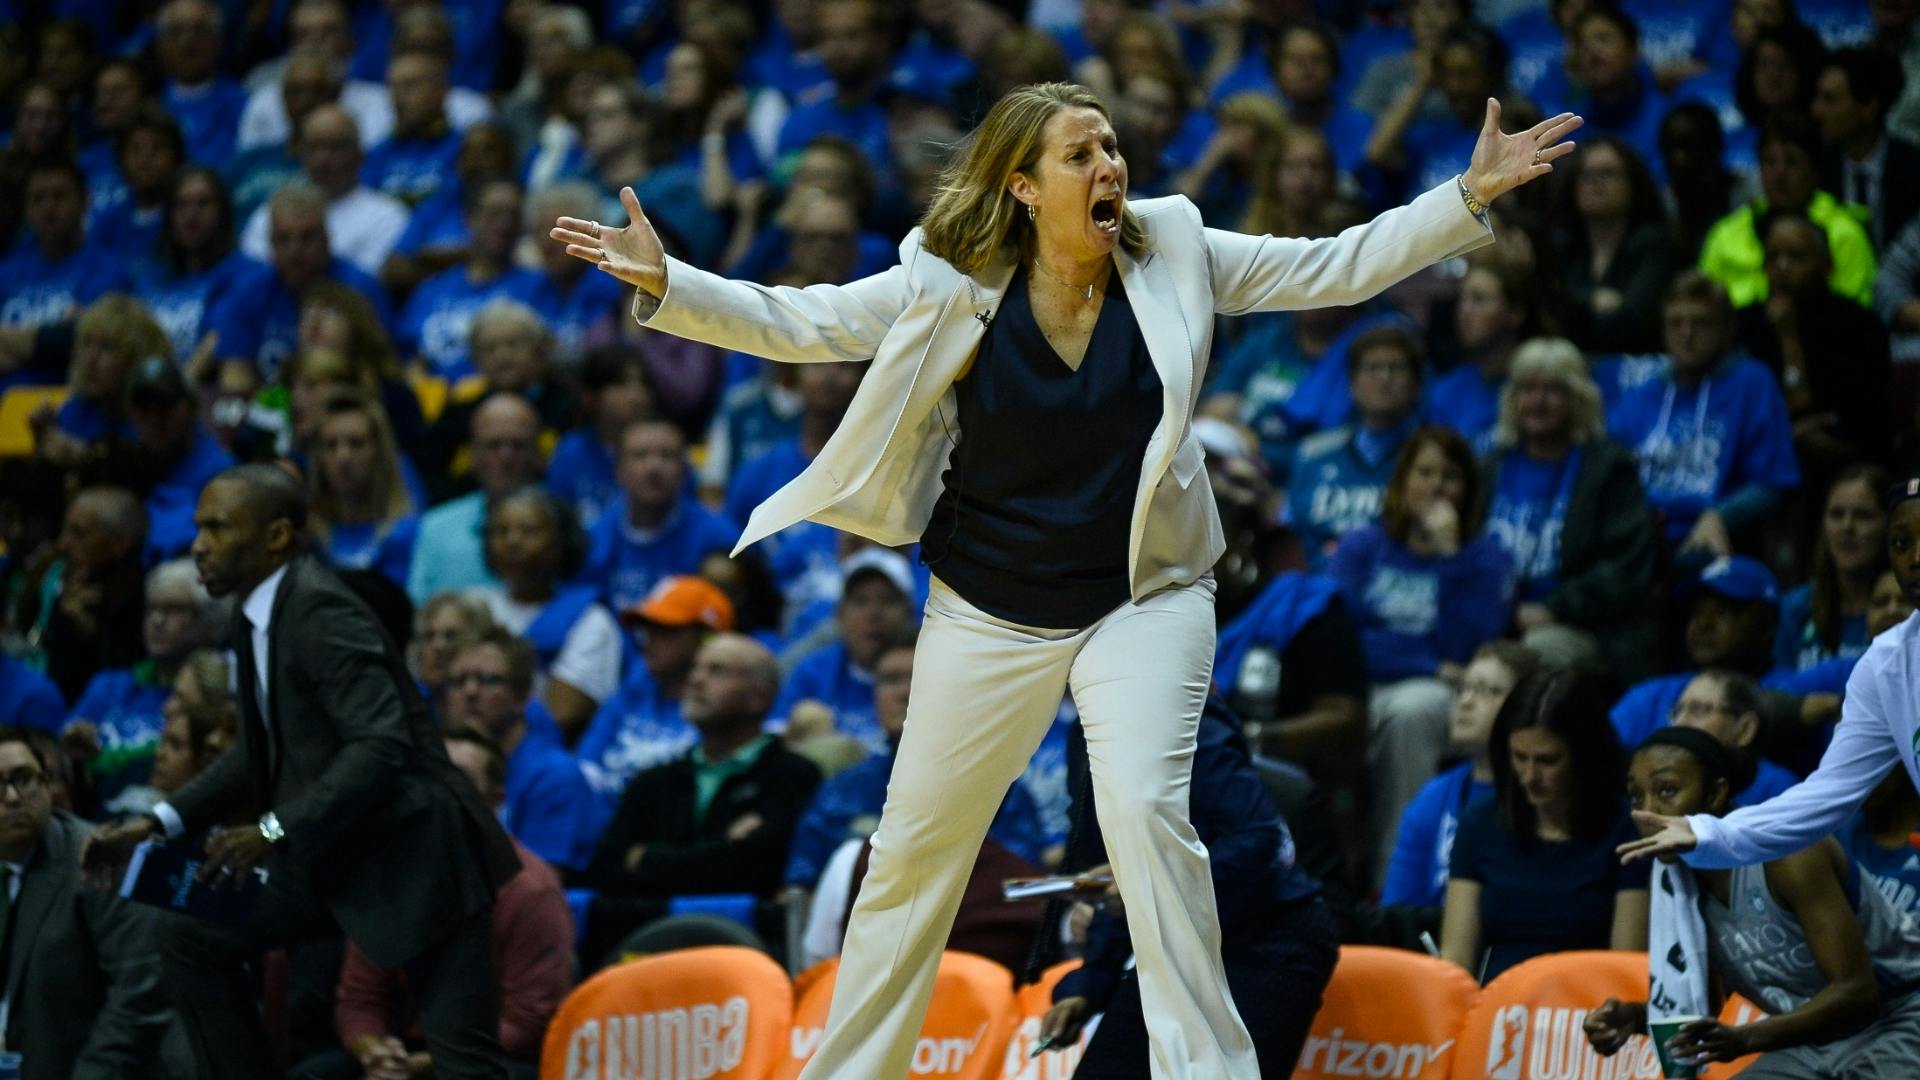 The Lynx on Tuesday evened the WNBA Finals with a win over the Sparks in Game 2.